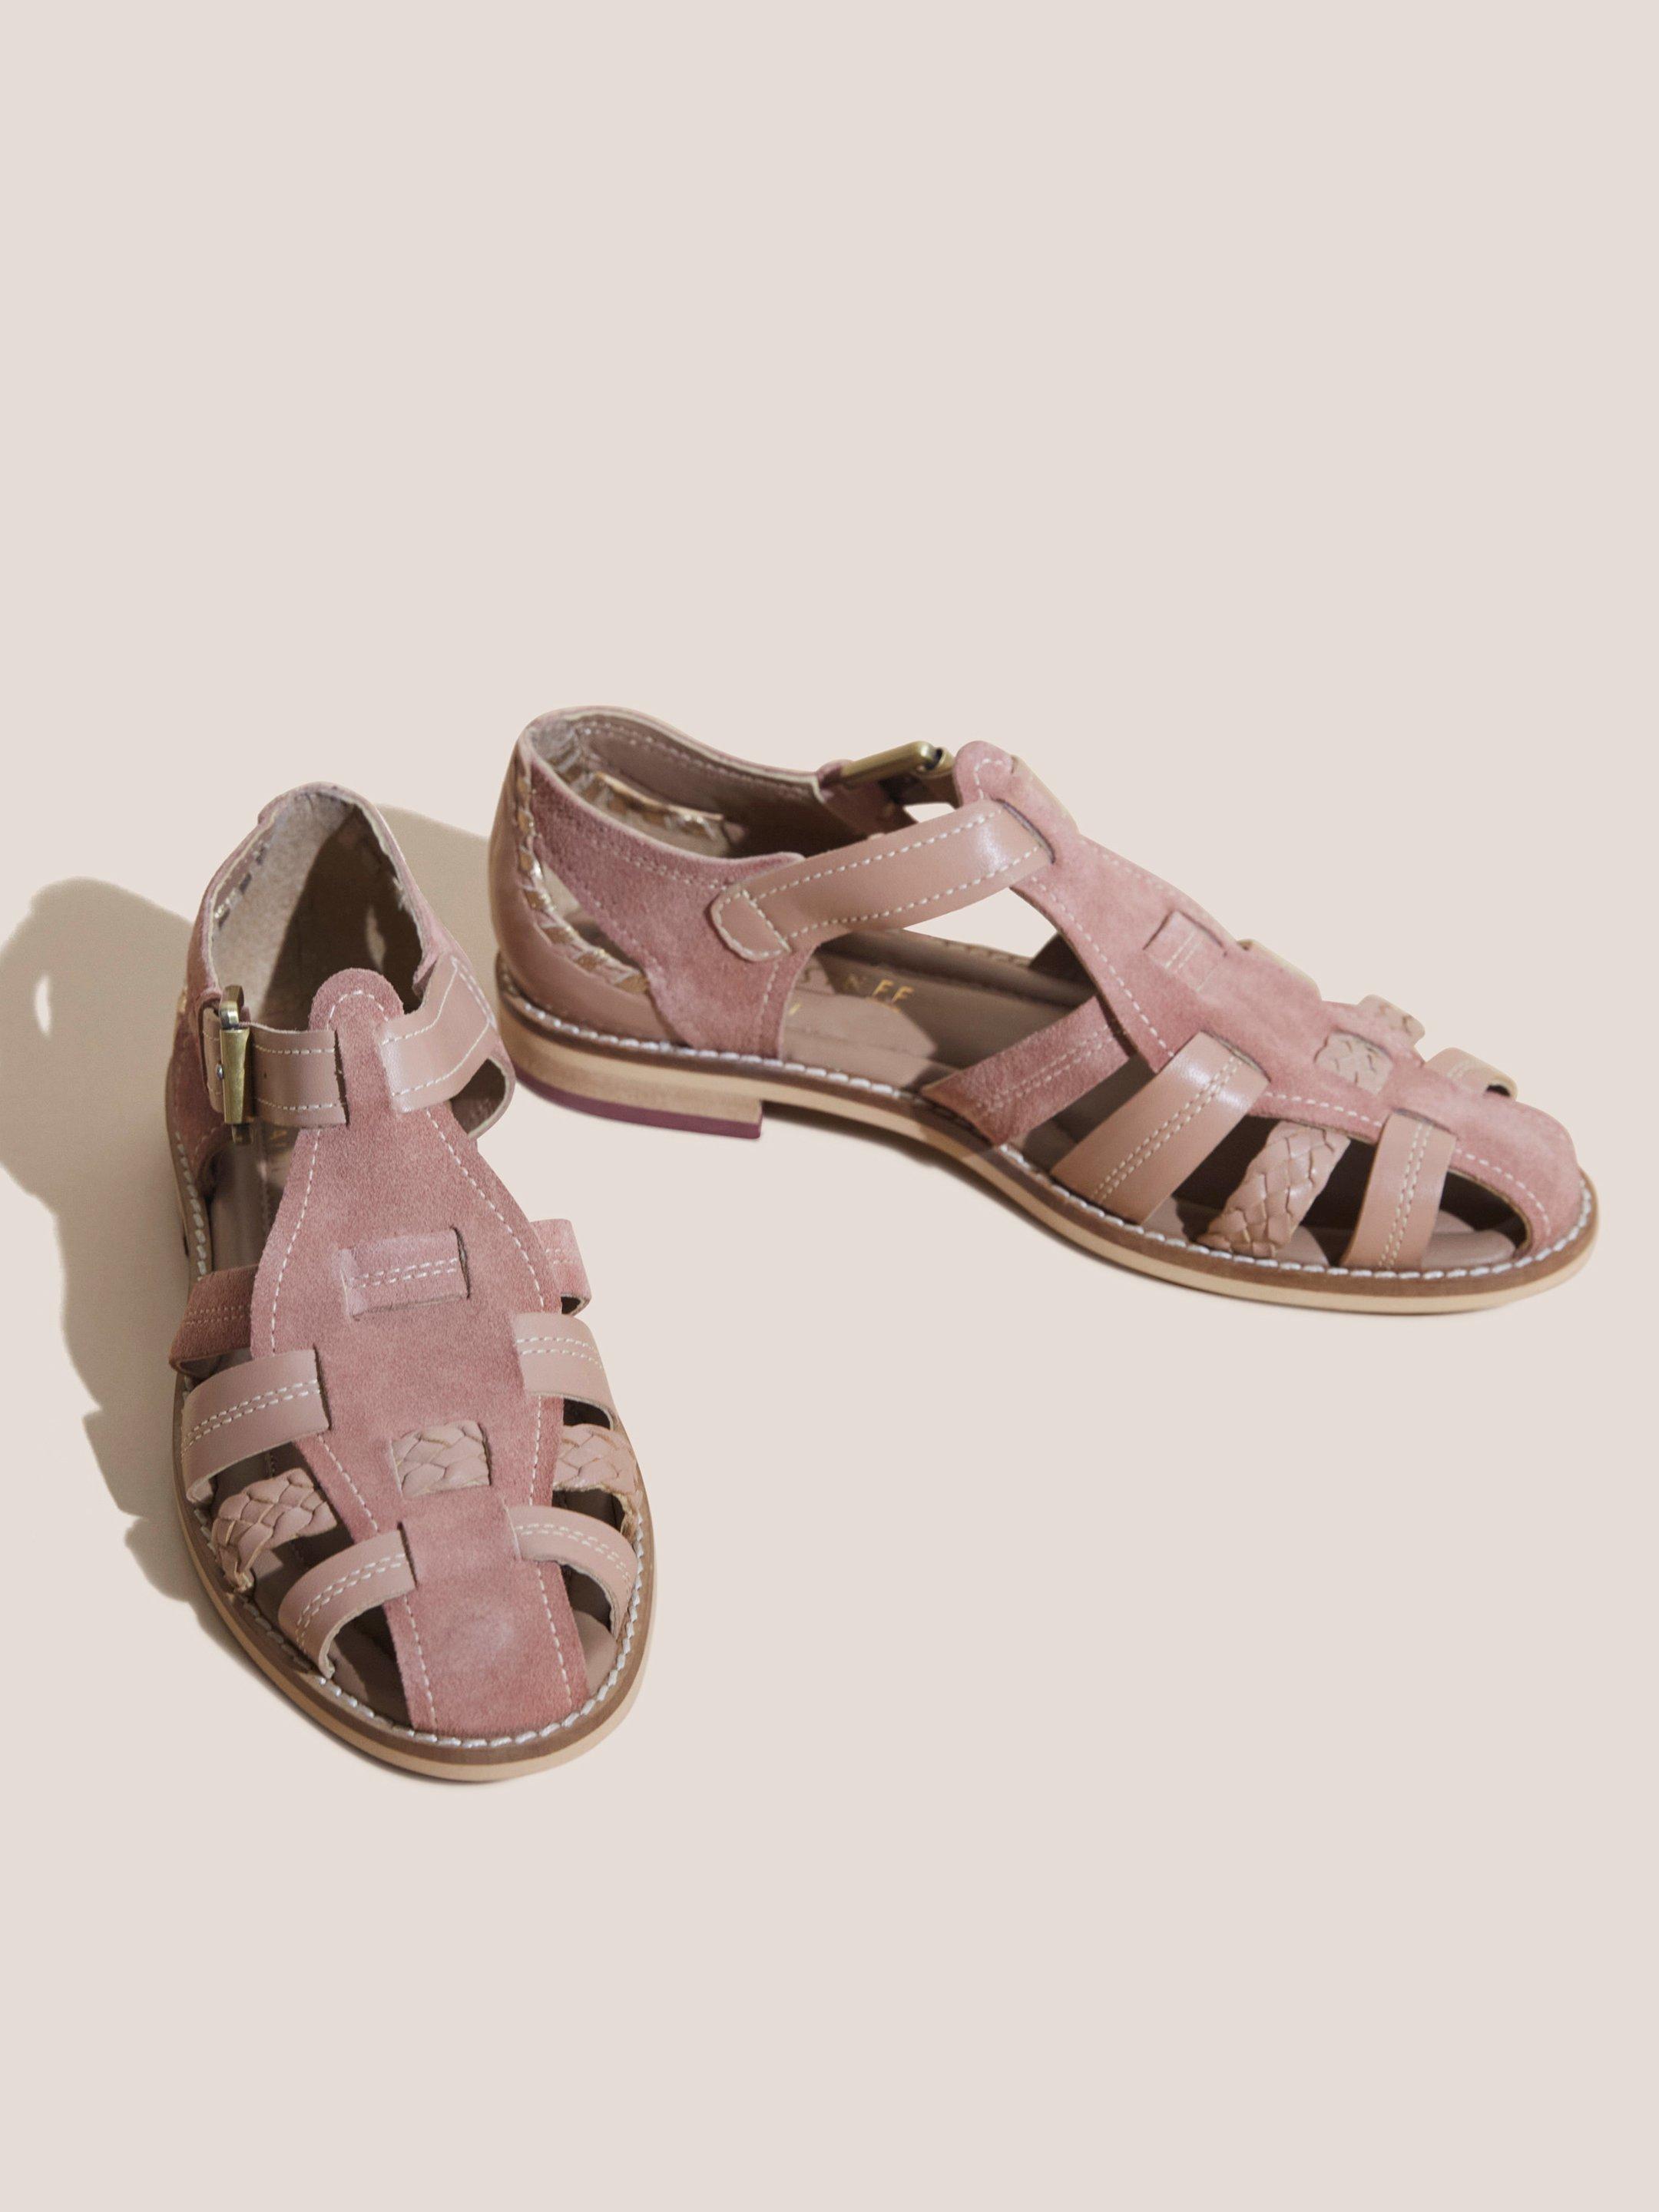 Fisherman Shoe in MID PINK - FLAT FRONT